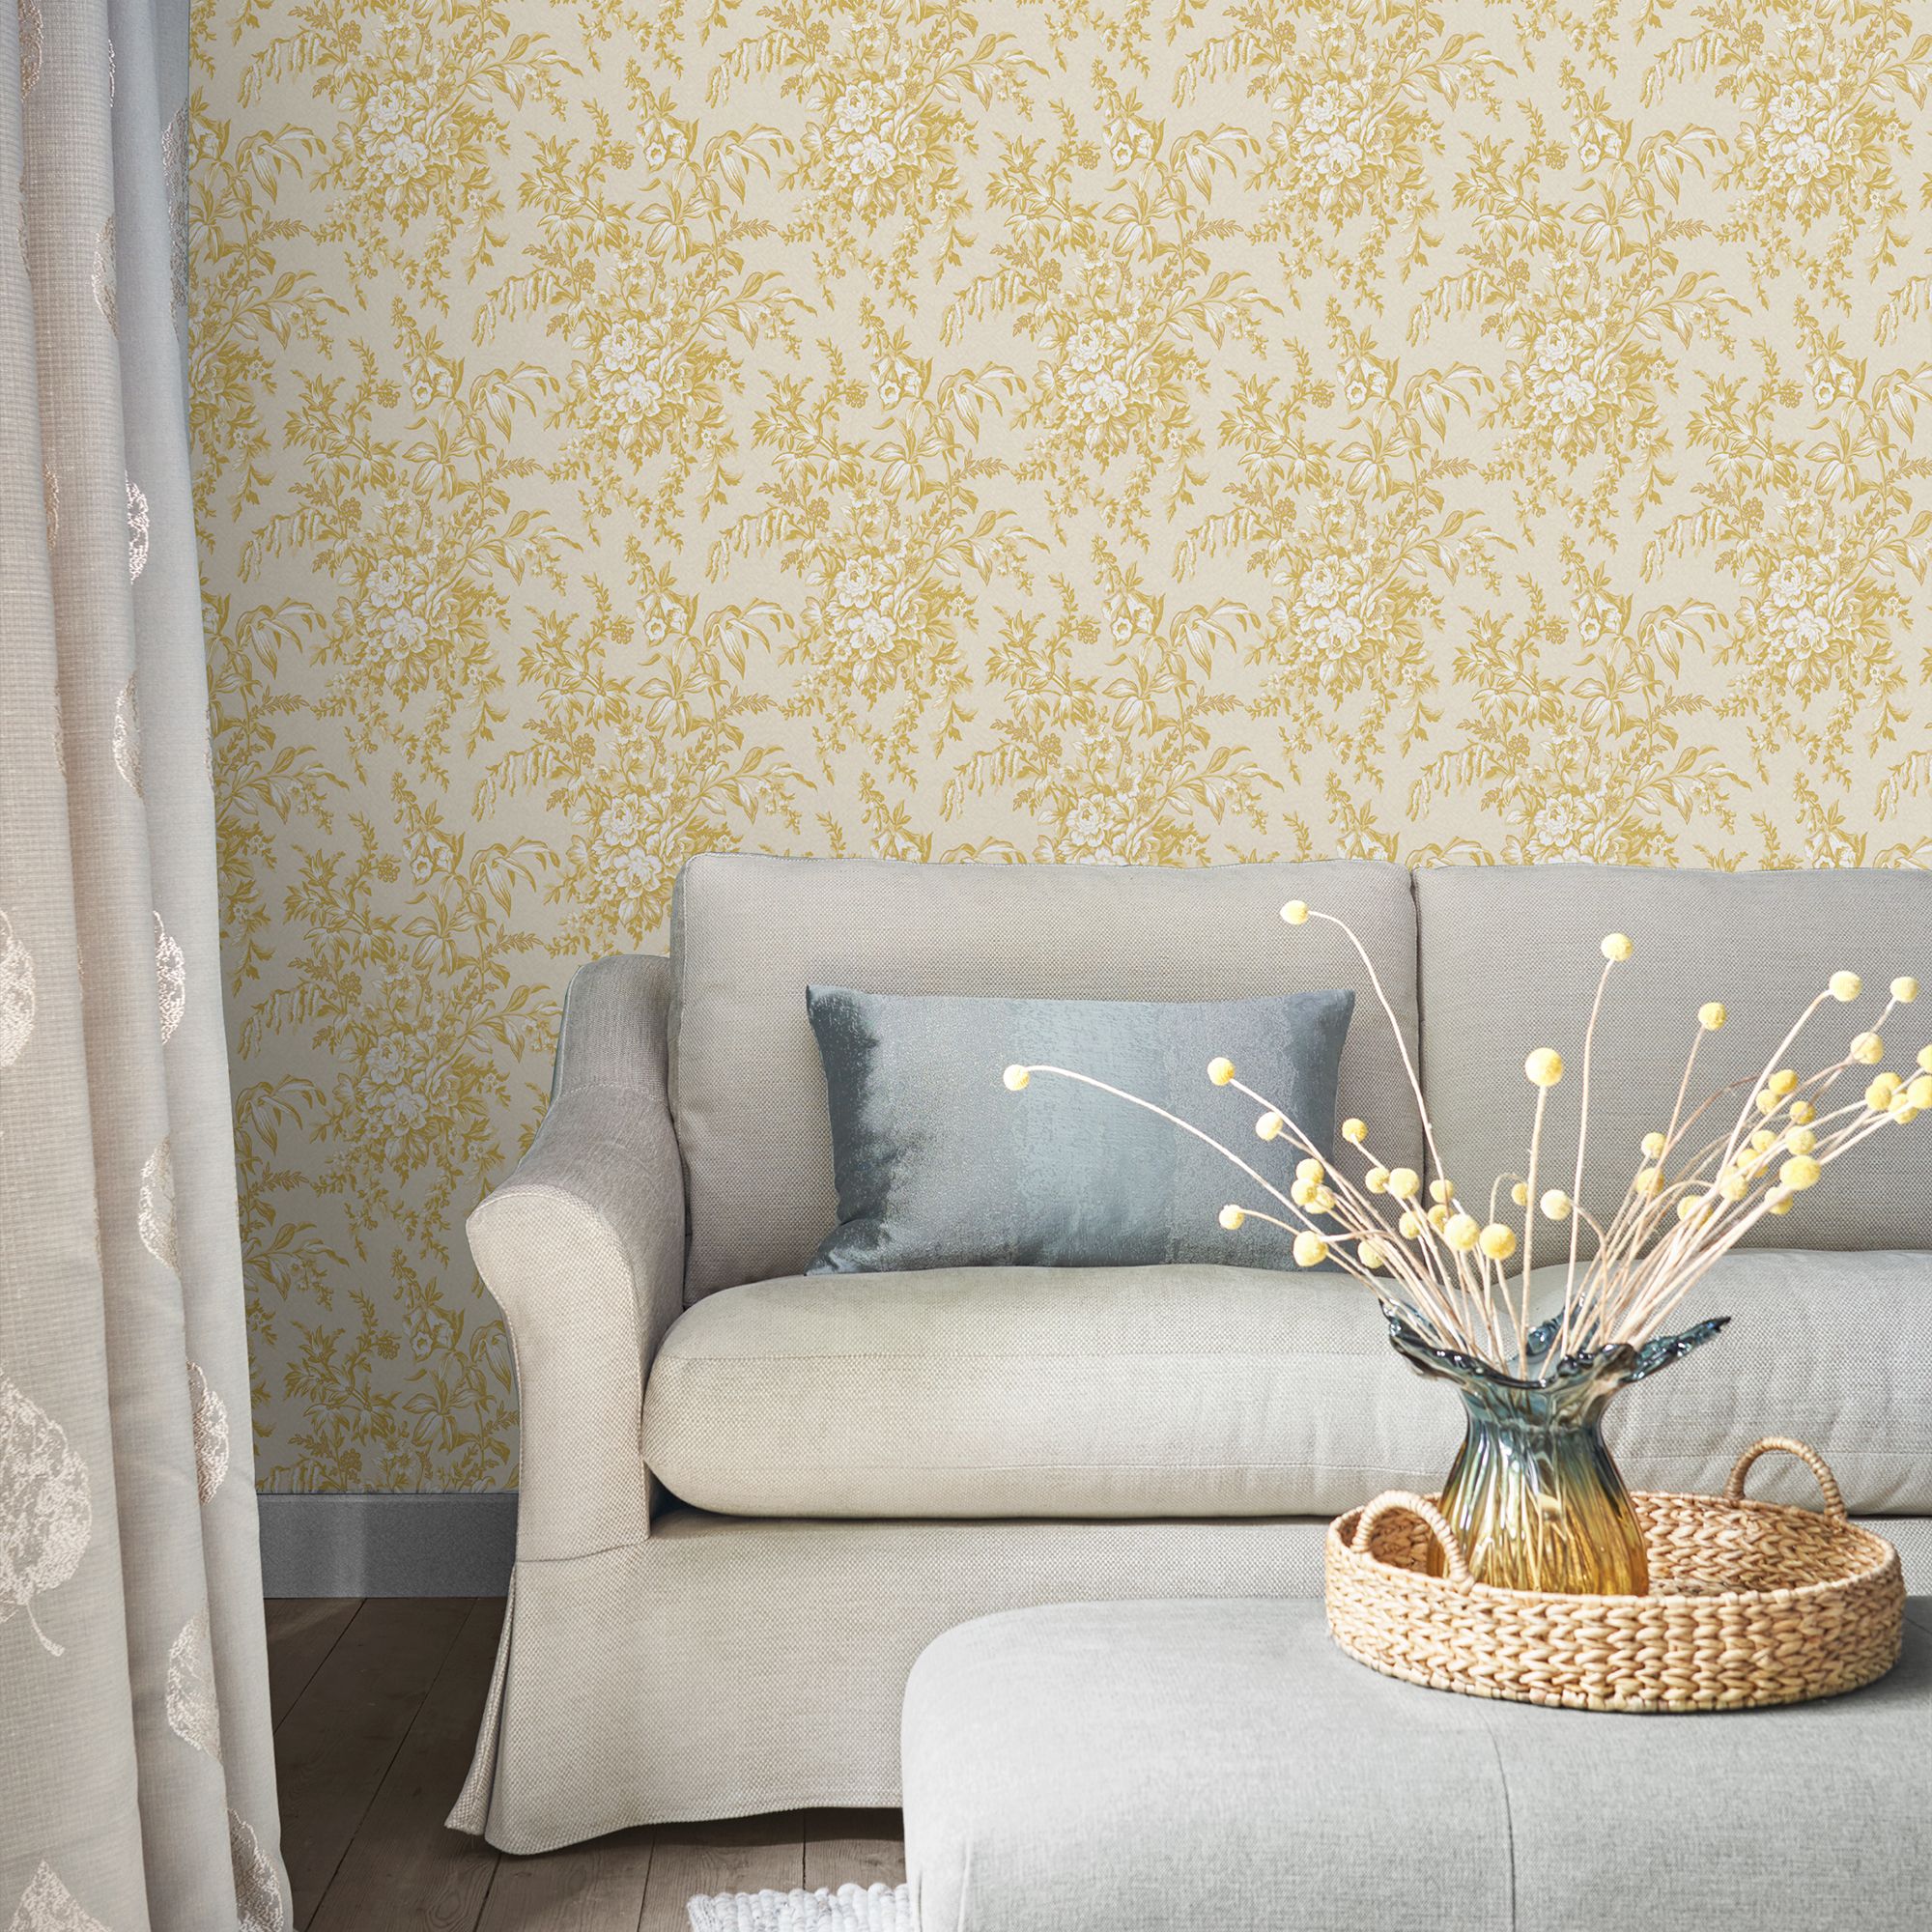 Laura Ashley Picardie Pale gold Floral Smooth Wallpaper Sample